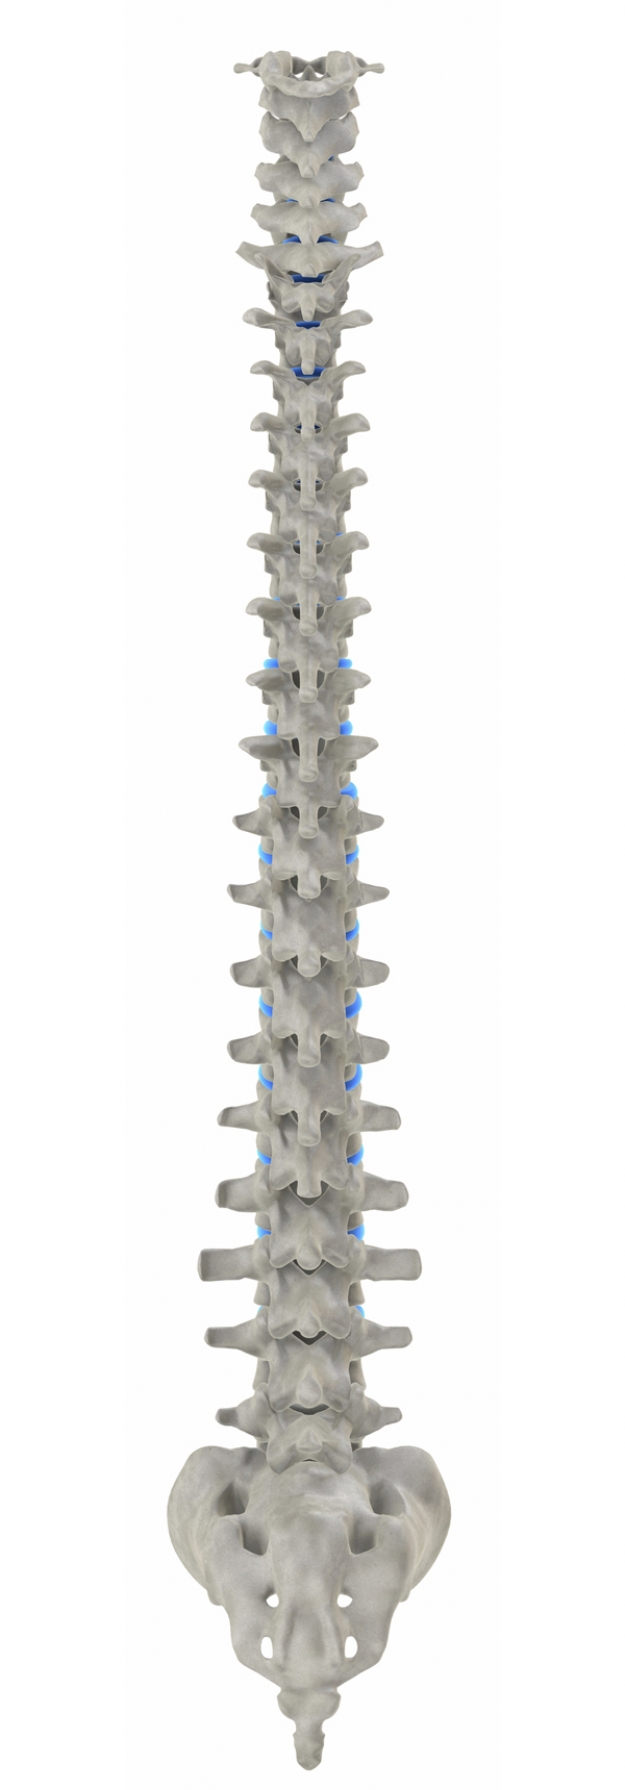 Ideal spinal column seen from behind